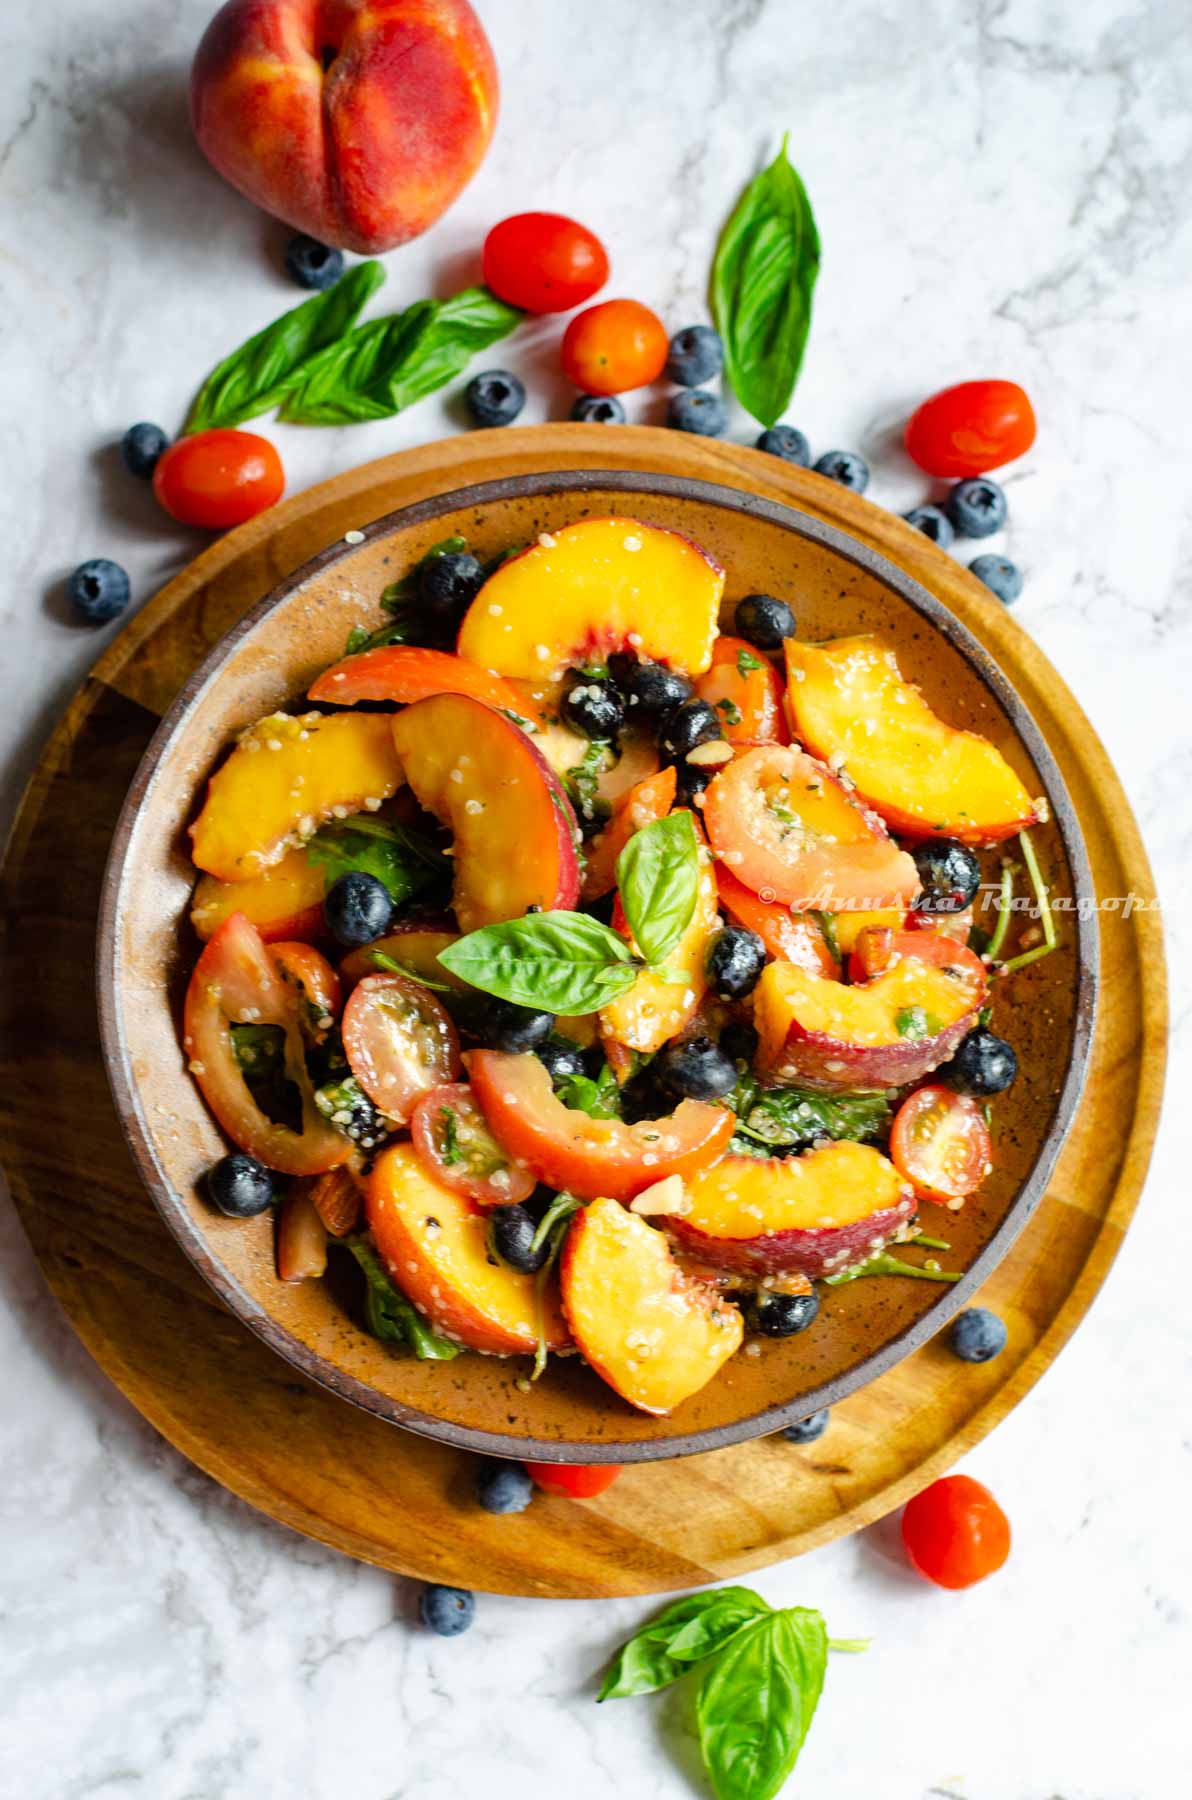 vegan peach salad with summer fruit served in Khaki brown shallow bowl placed over a wooden plate. Fruits scattered around the plate.